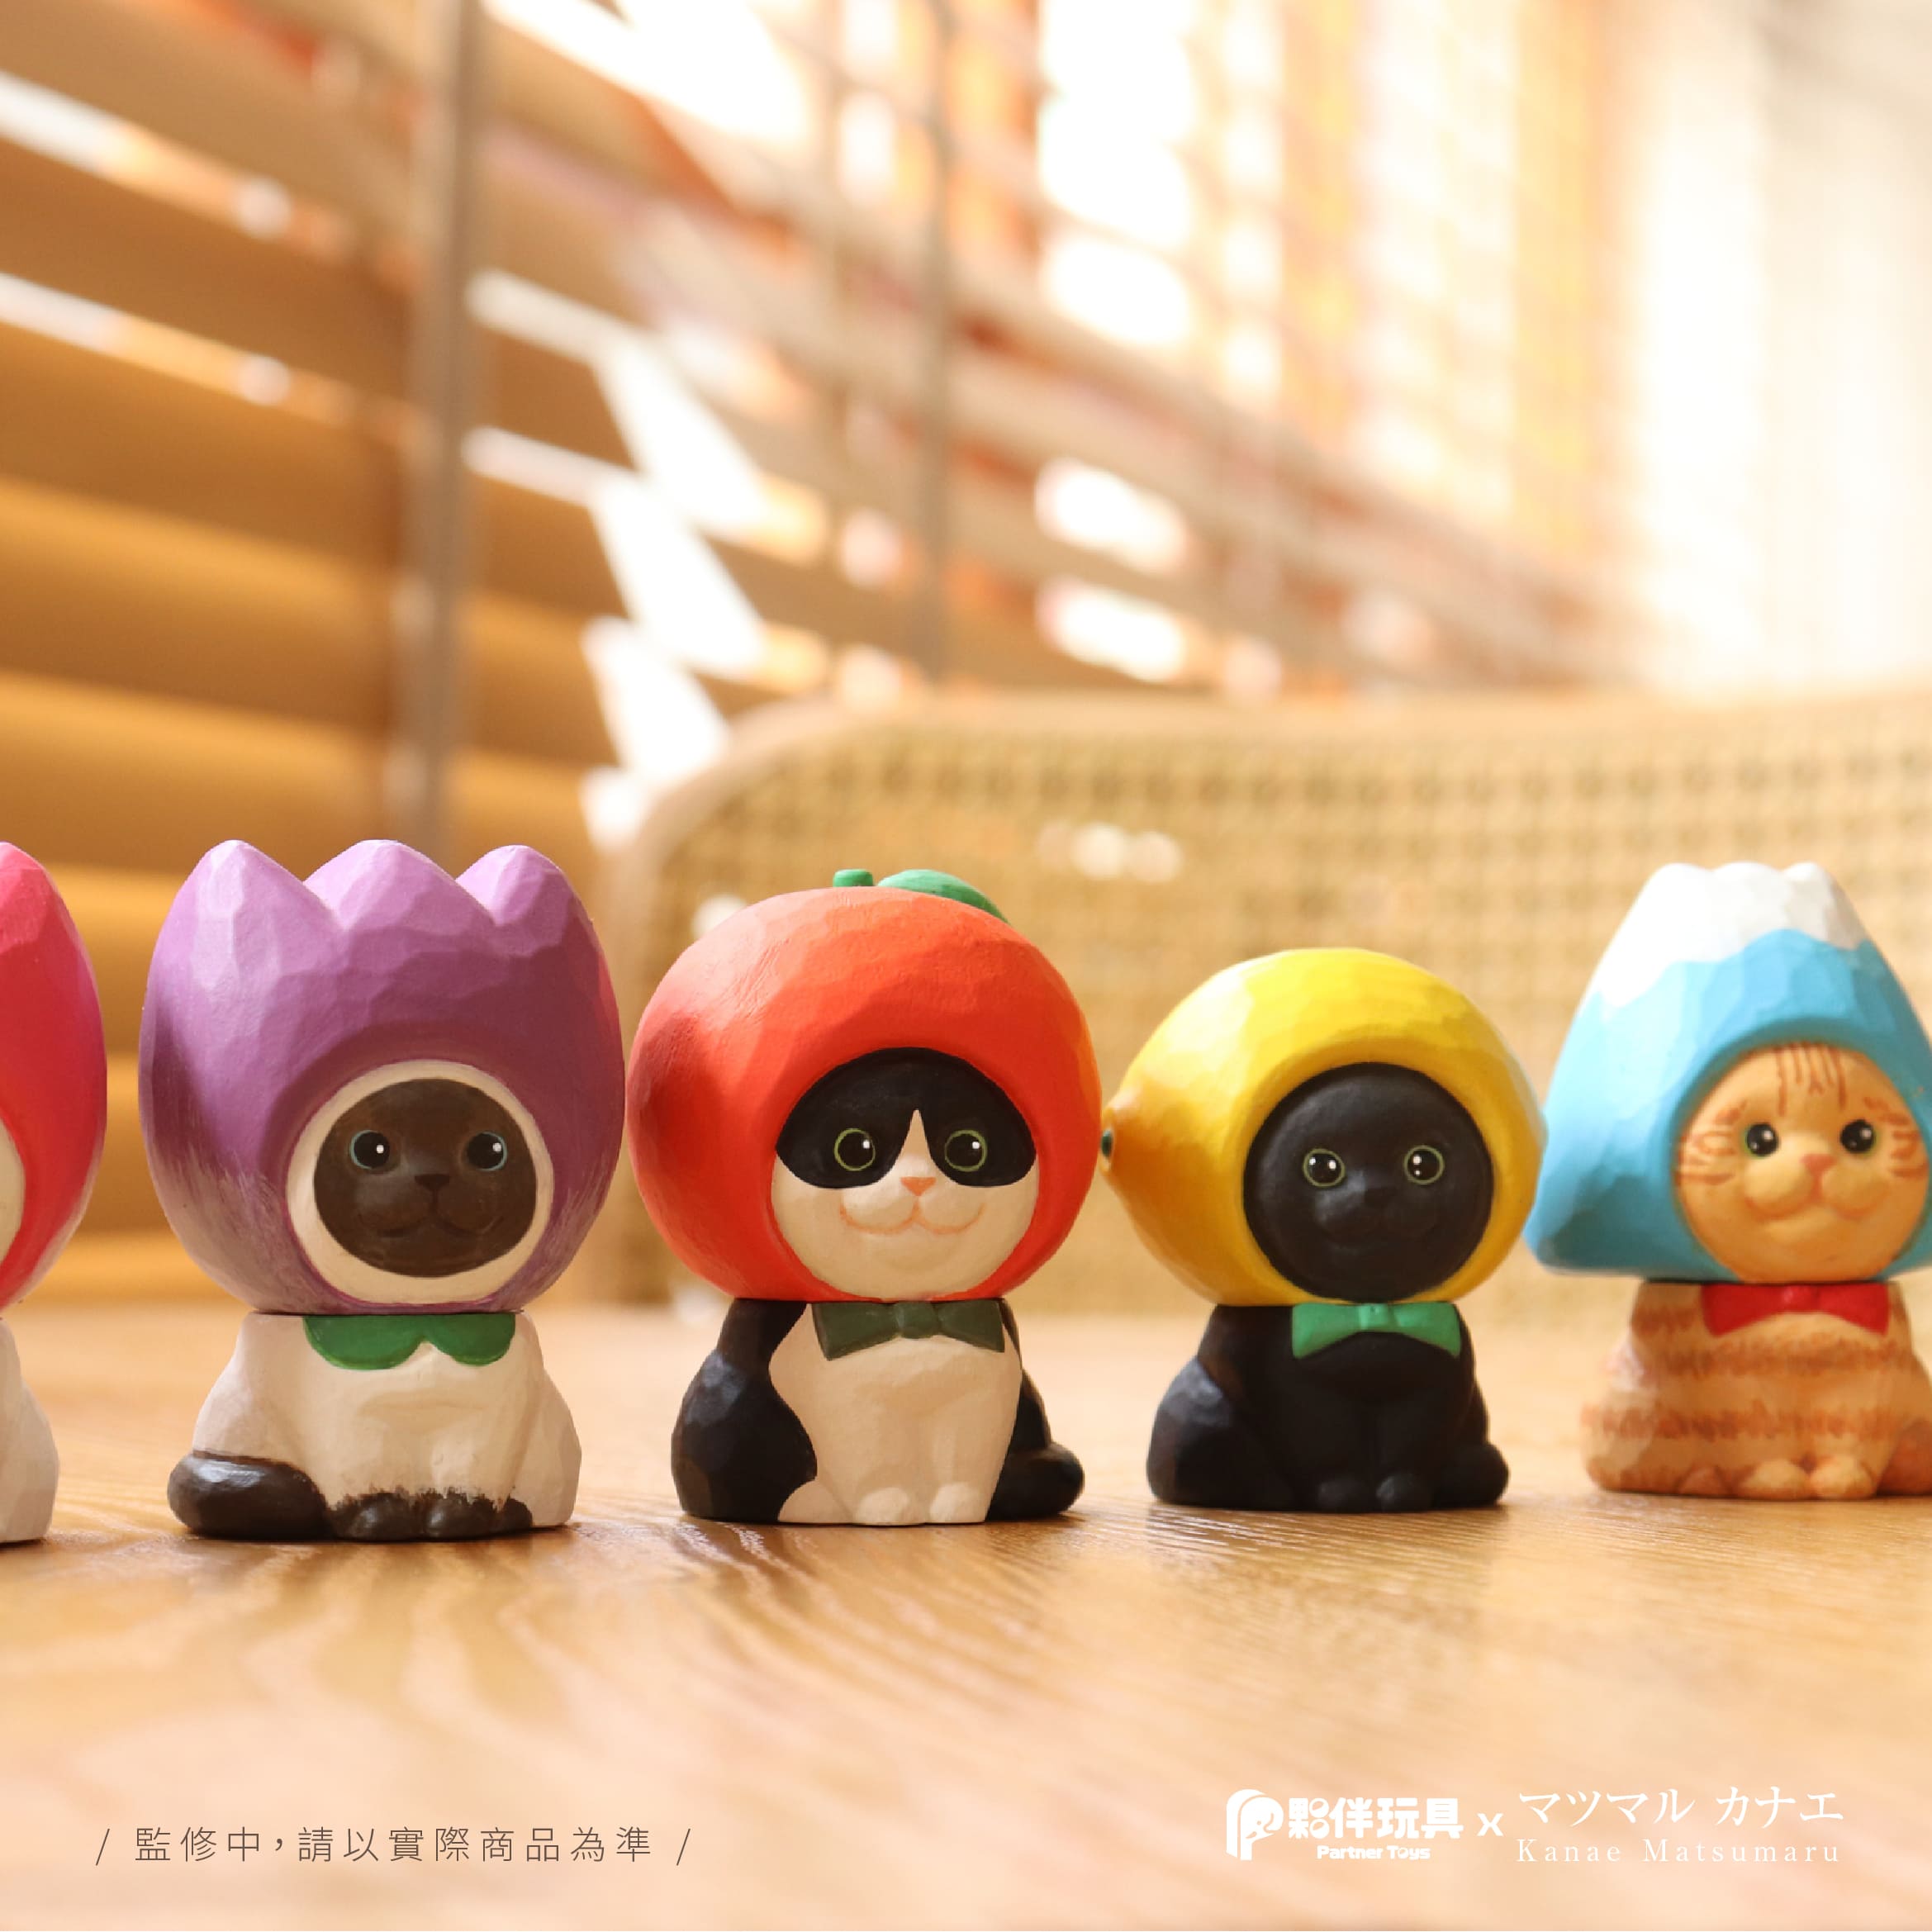 A group of small cat figurines from Matsu's cats Blind Box Series, including a cat wearing a hat and a toy.